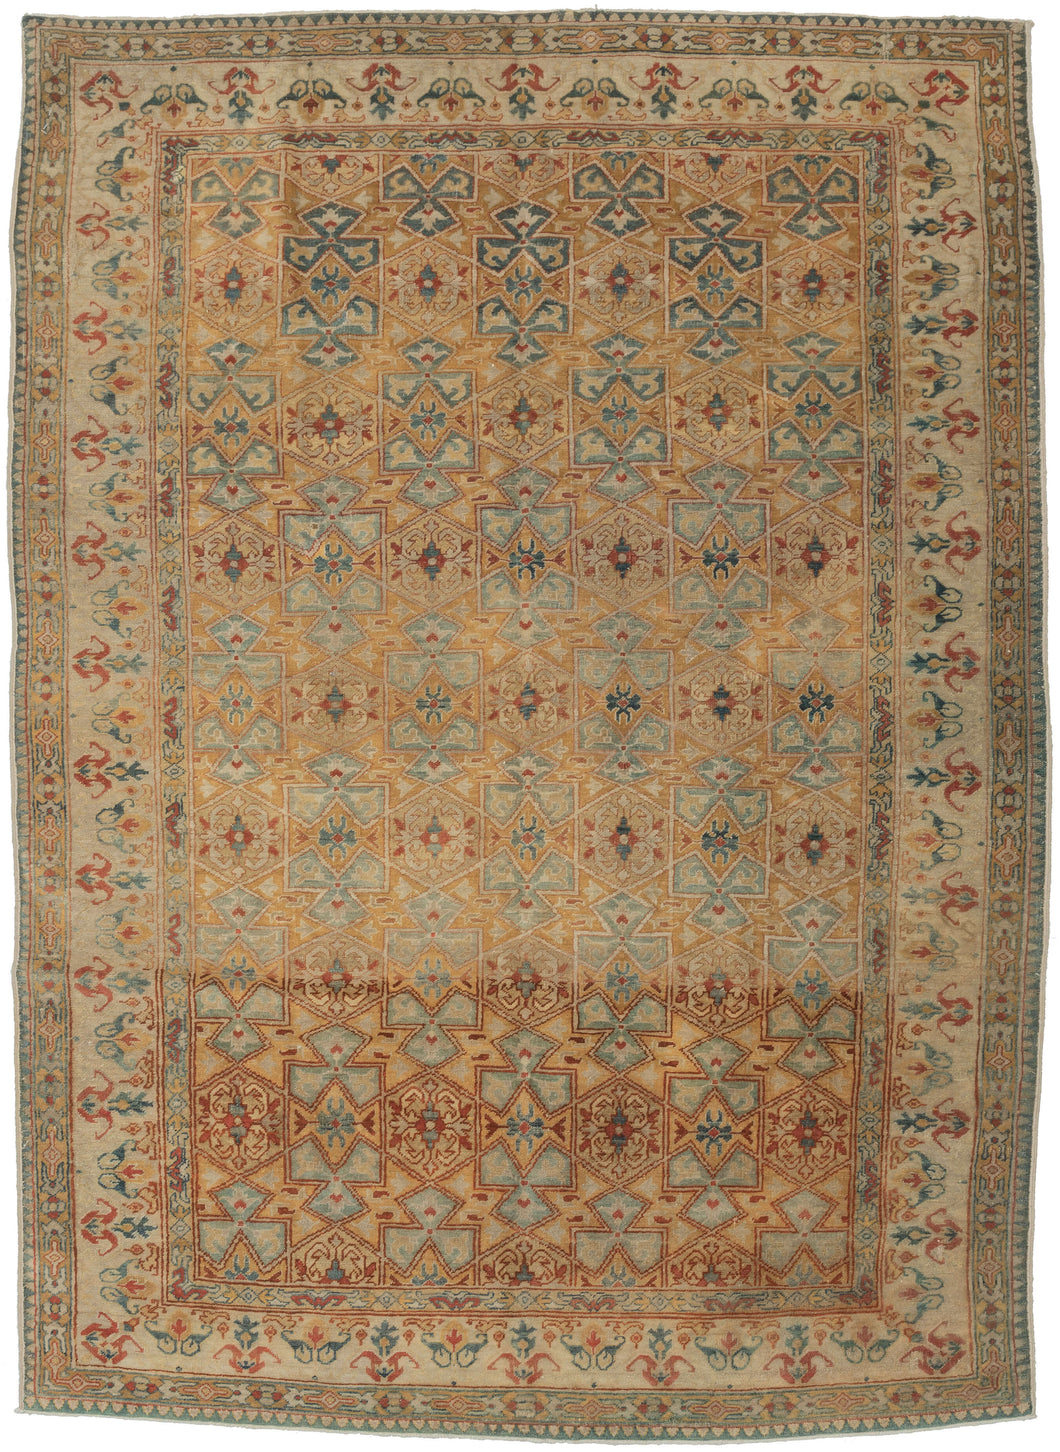 Architectural Yellow Sivas Rug features an elaborate and geometric mosaic of rosettes, stars, and latticework that is more commonly associated with architecture and bookbinding. It is contained within the perfectly reconciled main border of meandering vegetal forms.